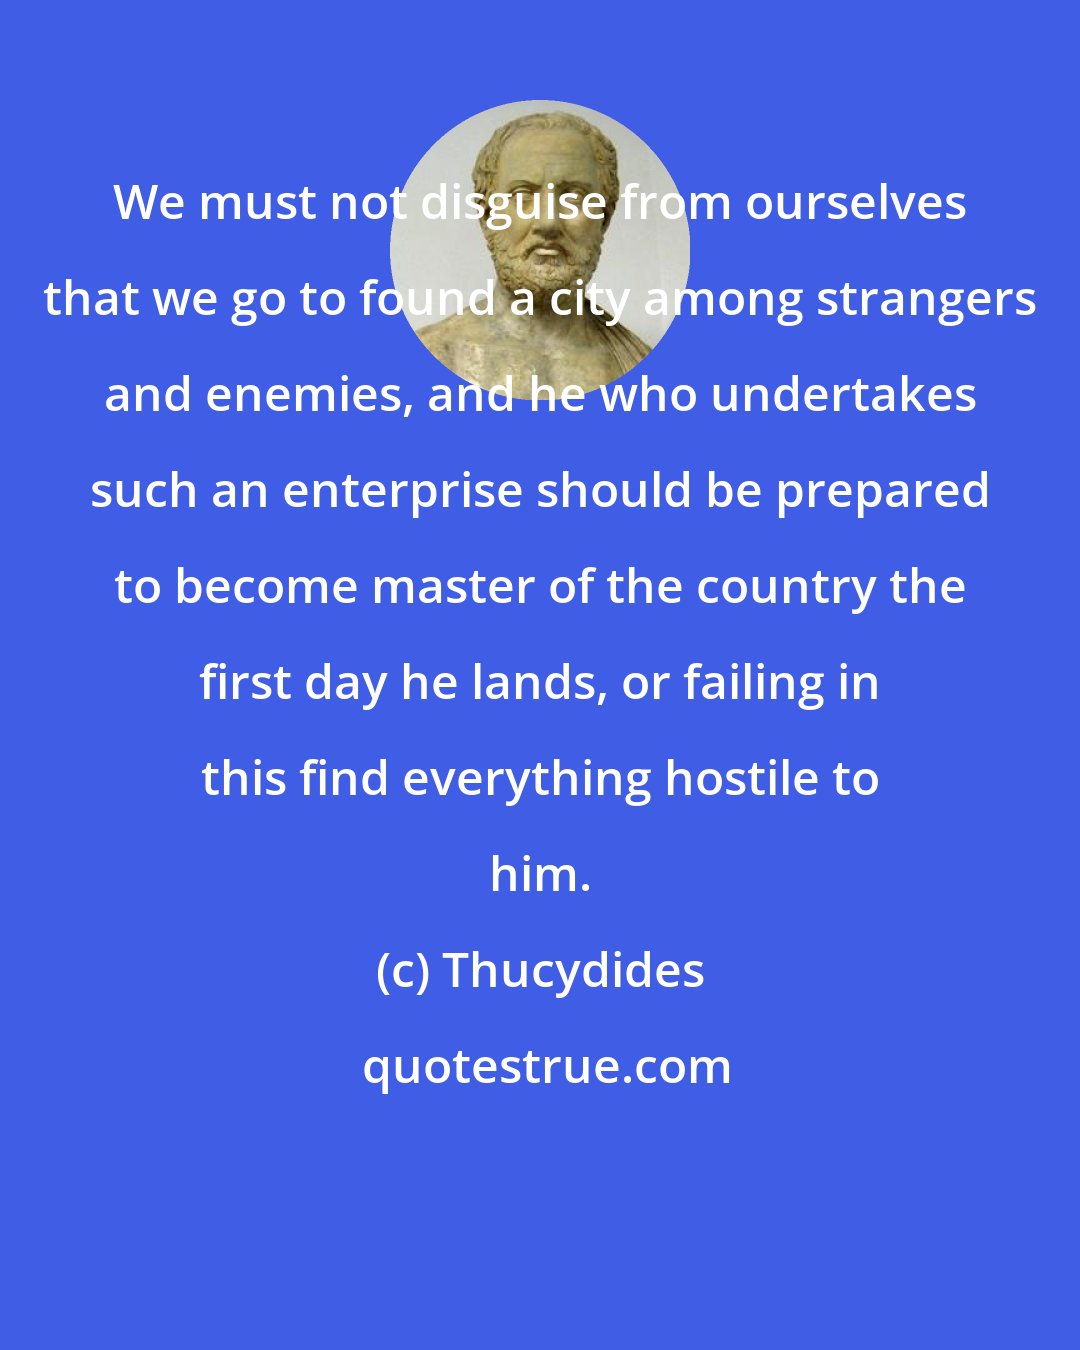 Thucydides: We must not disguise from ourselves that we go to found a city among strangers and enemies, and he who undertakes such an enterprise should be prepared to become master of the country the first day he lands, or failing in this find everything hostile to him.